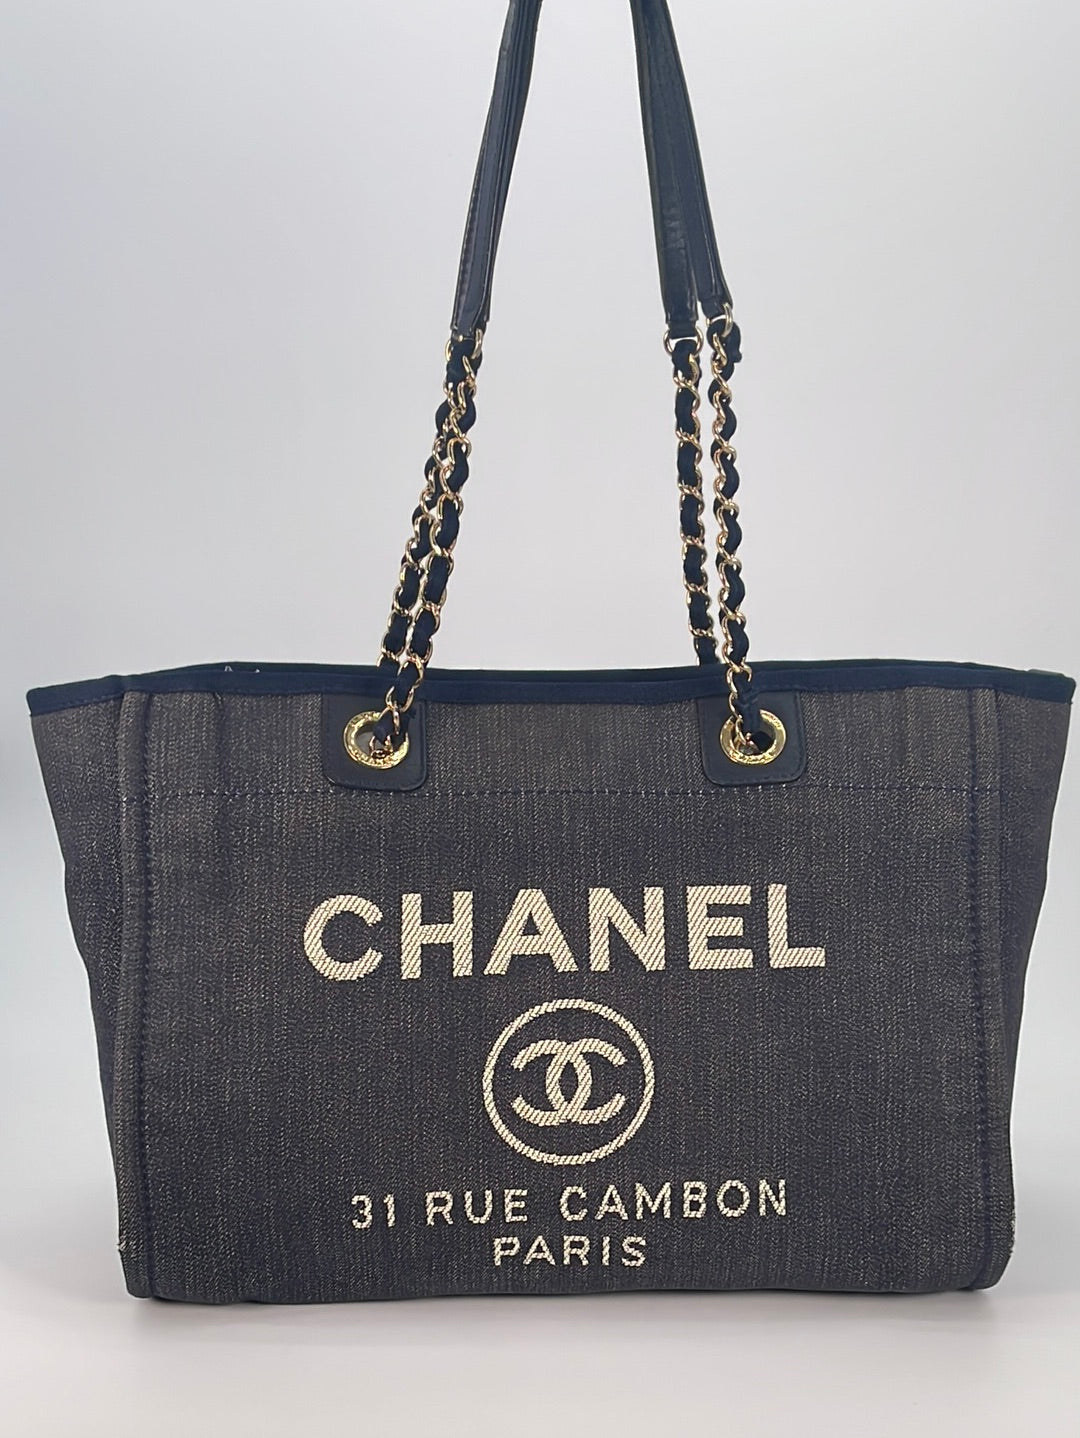 31 Rue Cambon Blue Deauville Shoulder Bag Tote (Authentic Pre-Owned)